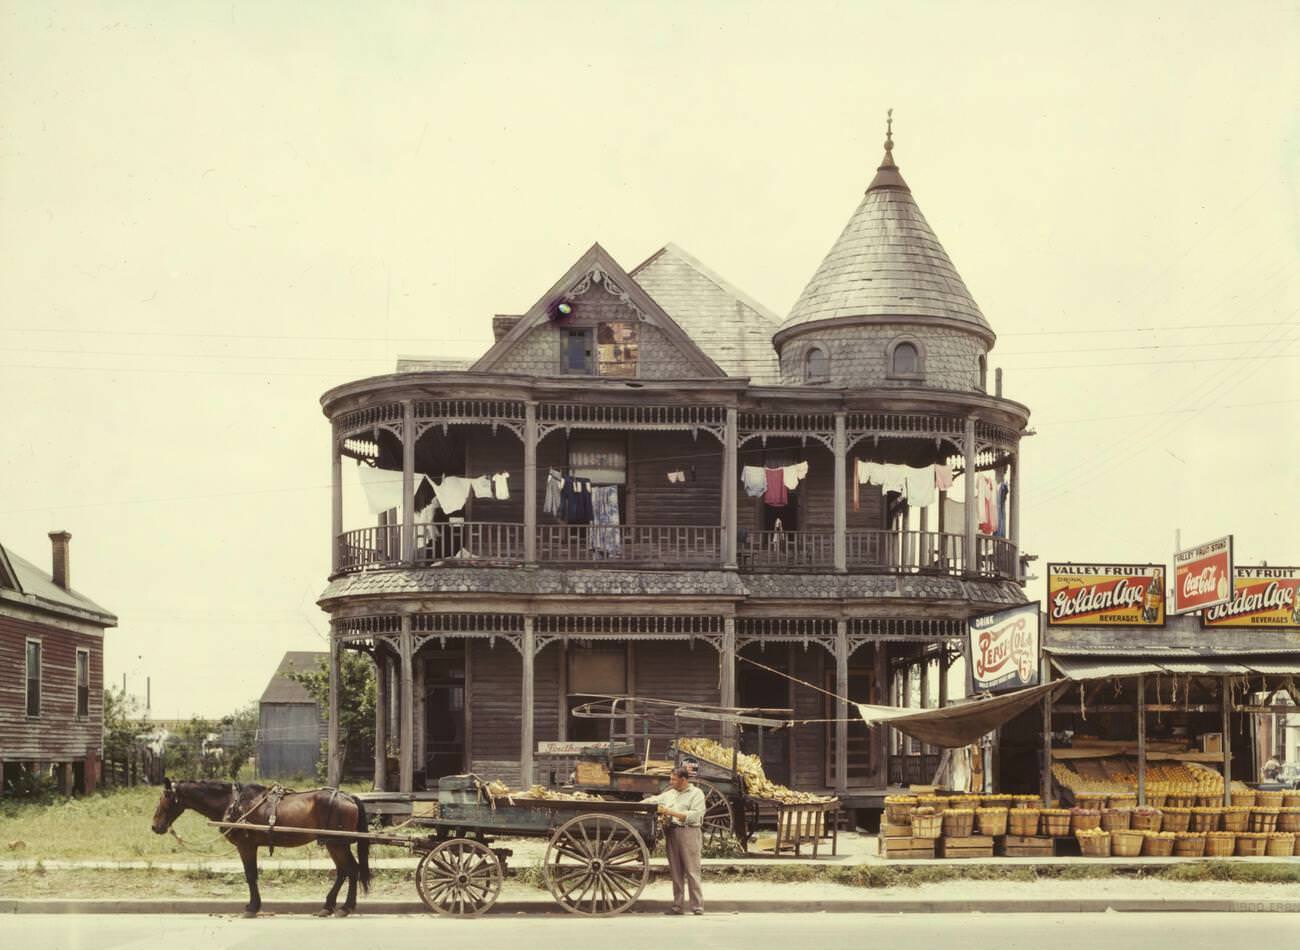 House in Houston, Texas, featuring a fruit stall with Pepsi-Cola and Valley Fruit Golden Age Beverages signs.